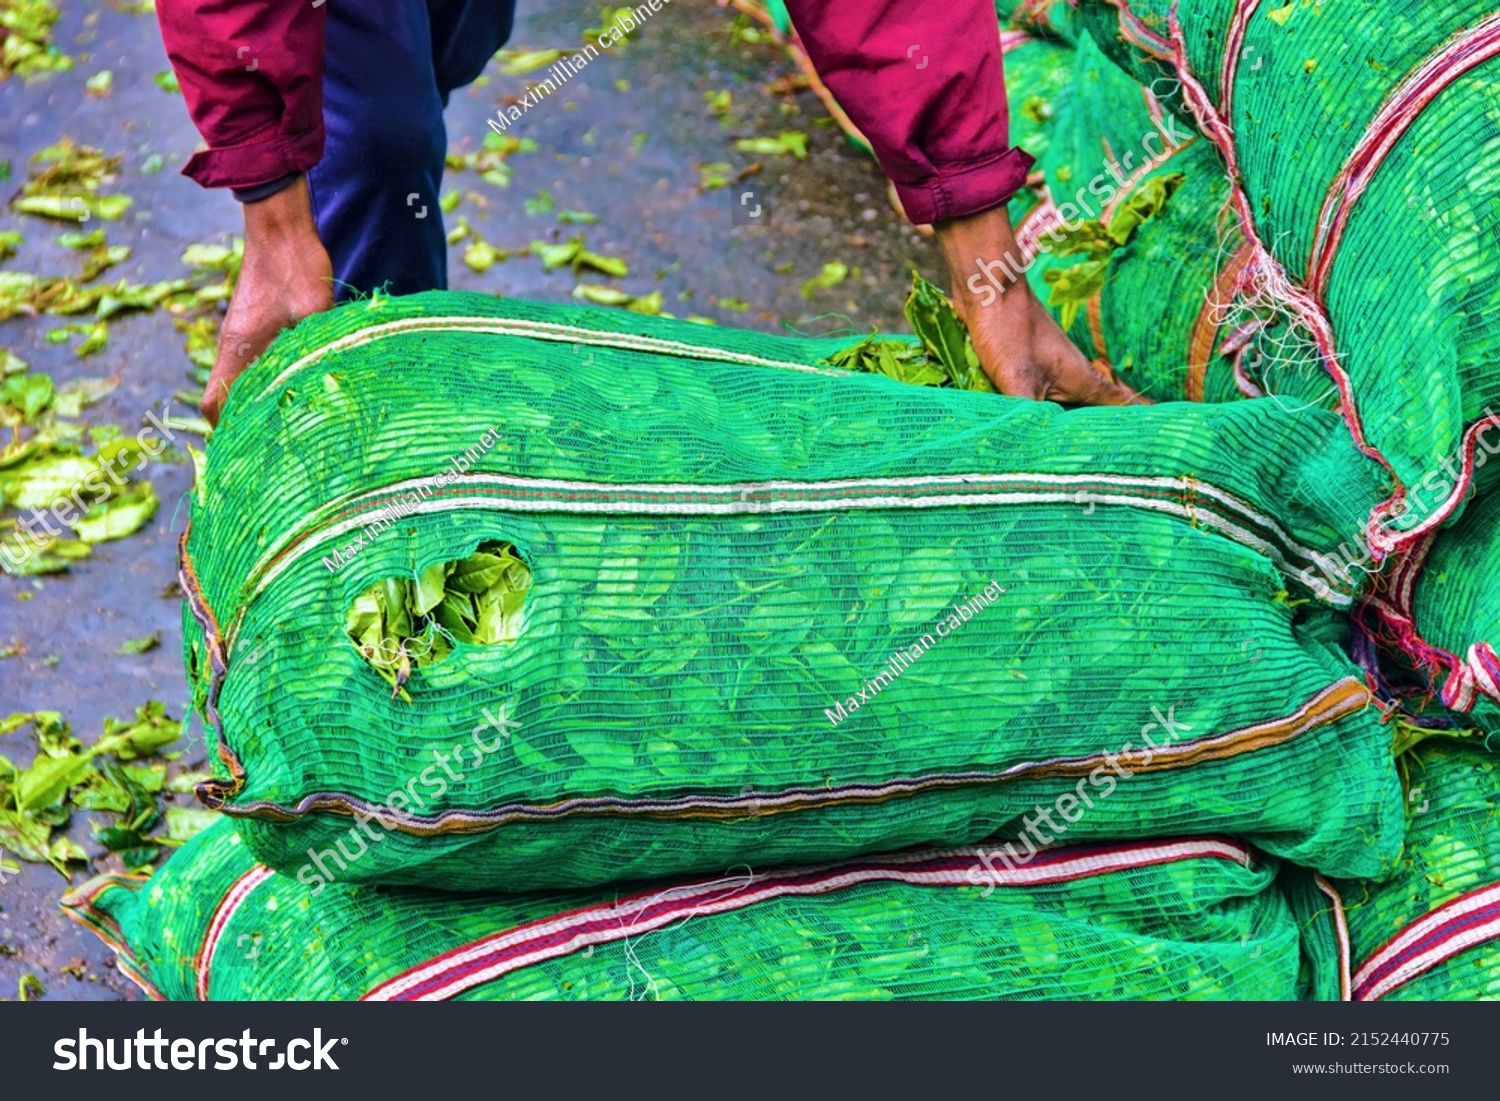 Collecting tea. Fresh green Ceylon tea is packed in bags for transportation to the tea-processing facility. Sri Lanka tea plantations #2152440775